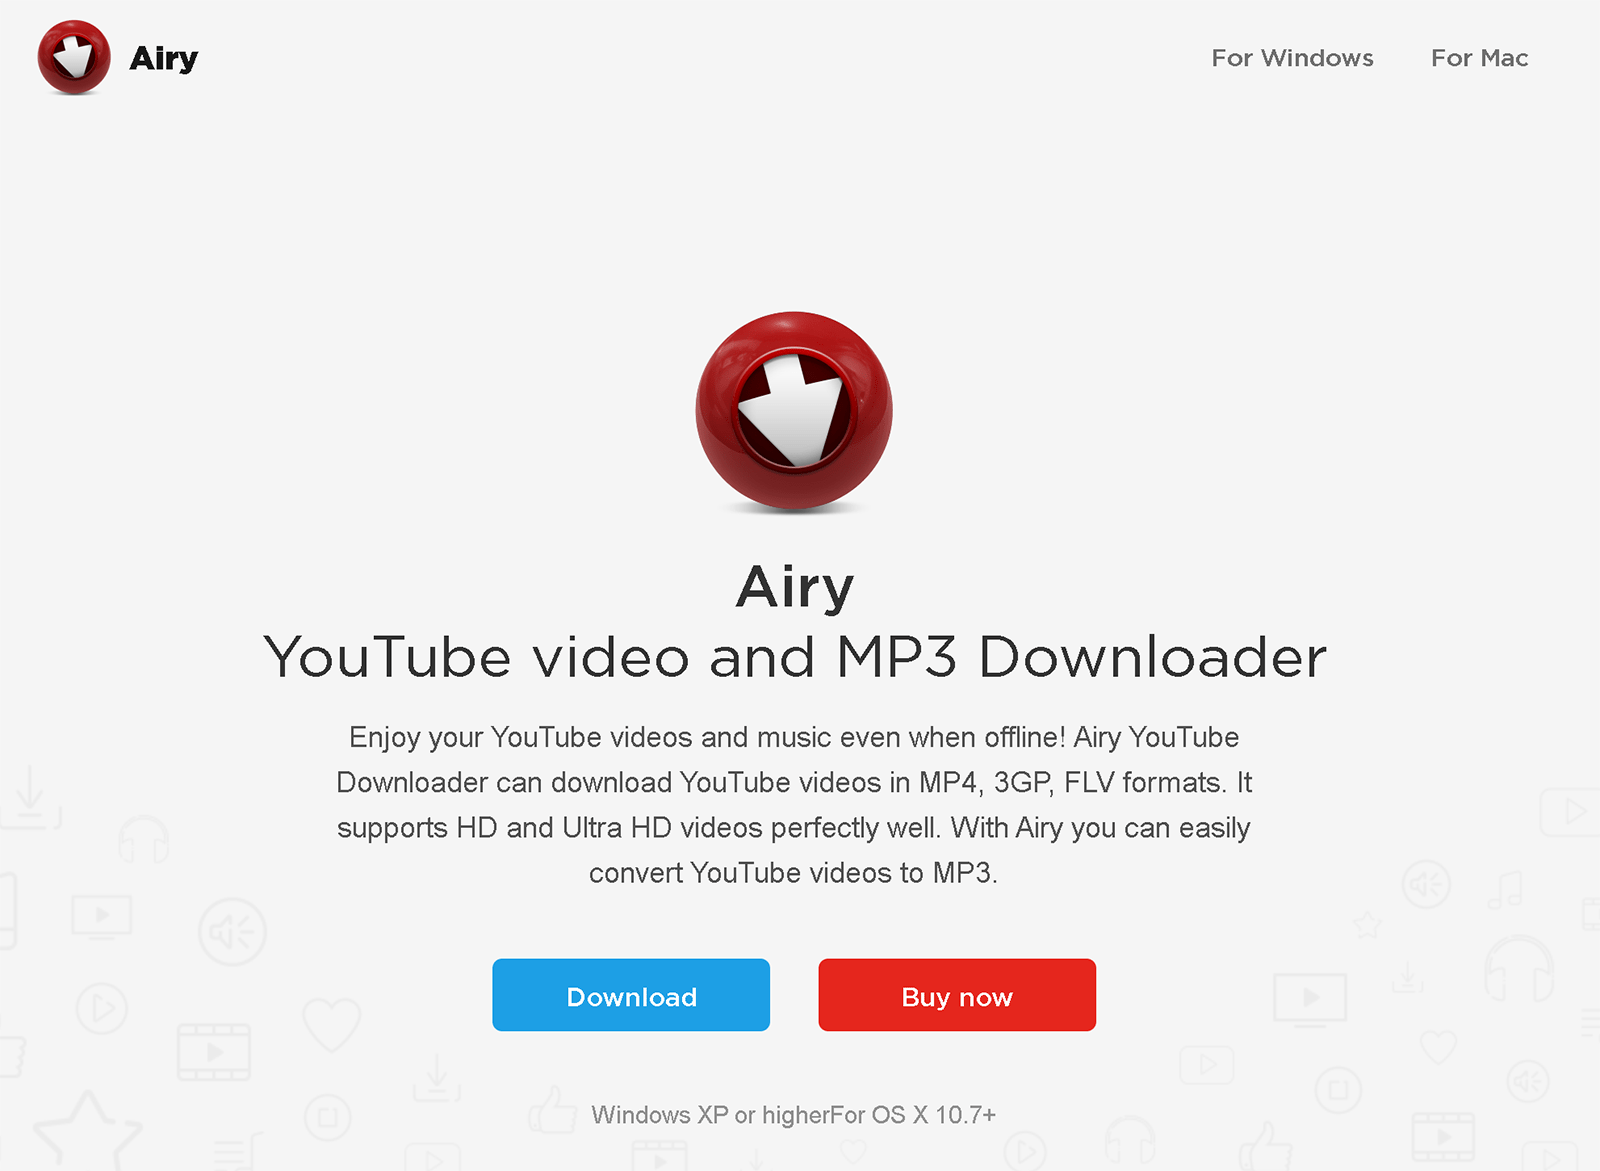 Everything you need to know about Airy- the YouTube Video Downloader for macOS 